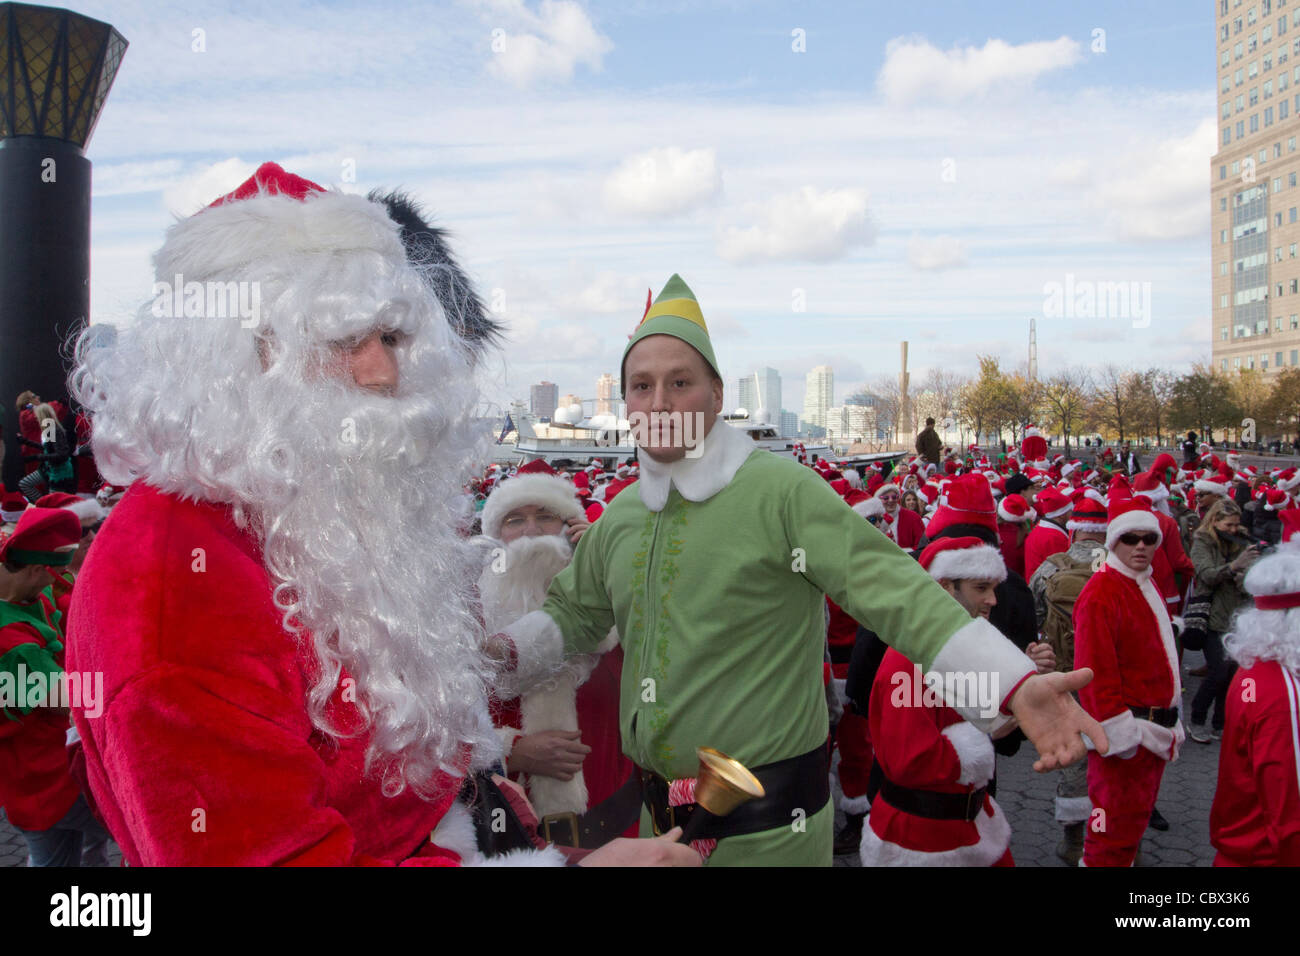 Thousands dressed as Santa Claus gather at the World Financial Center for Santacon 2011 Stock Photo